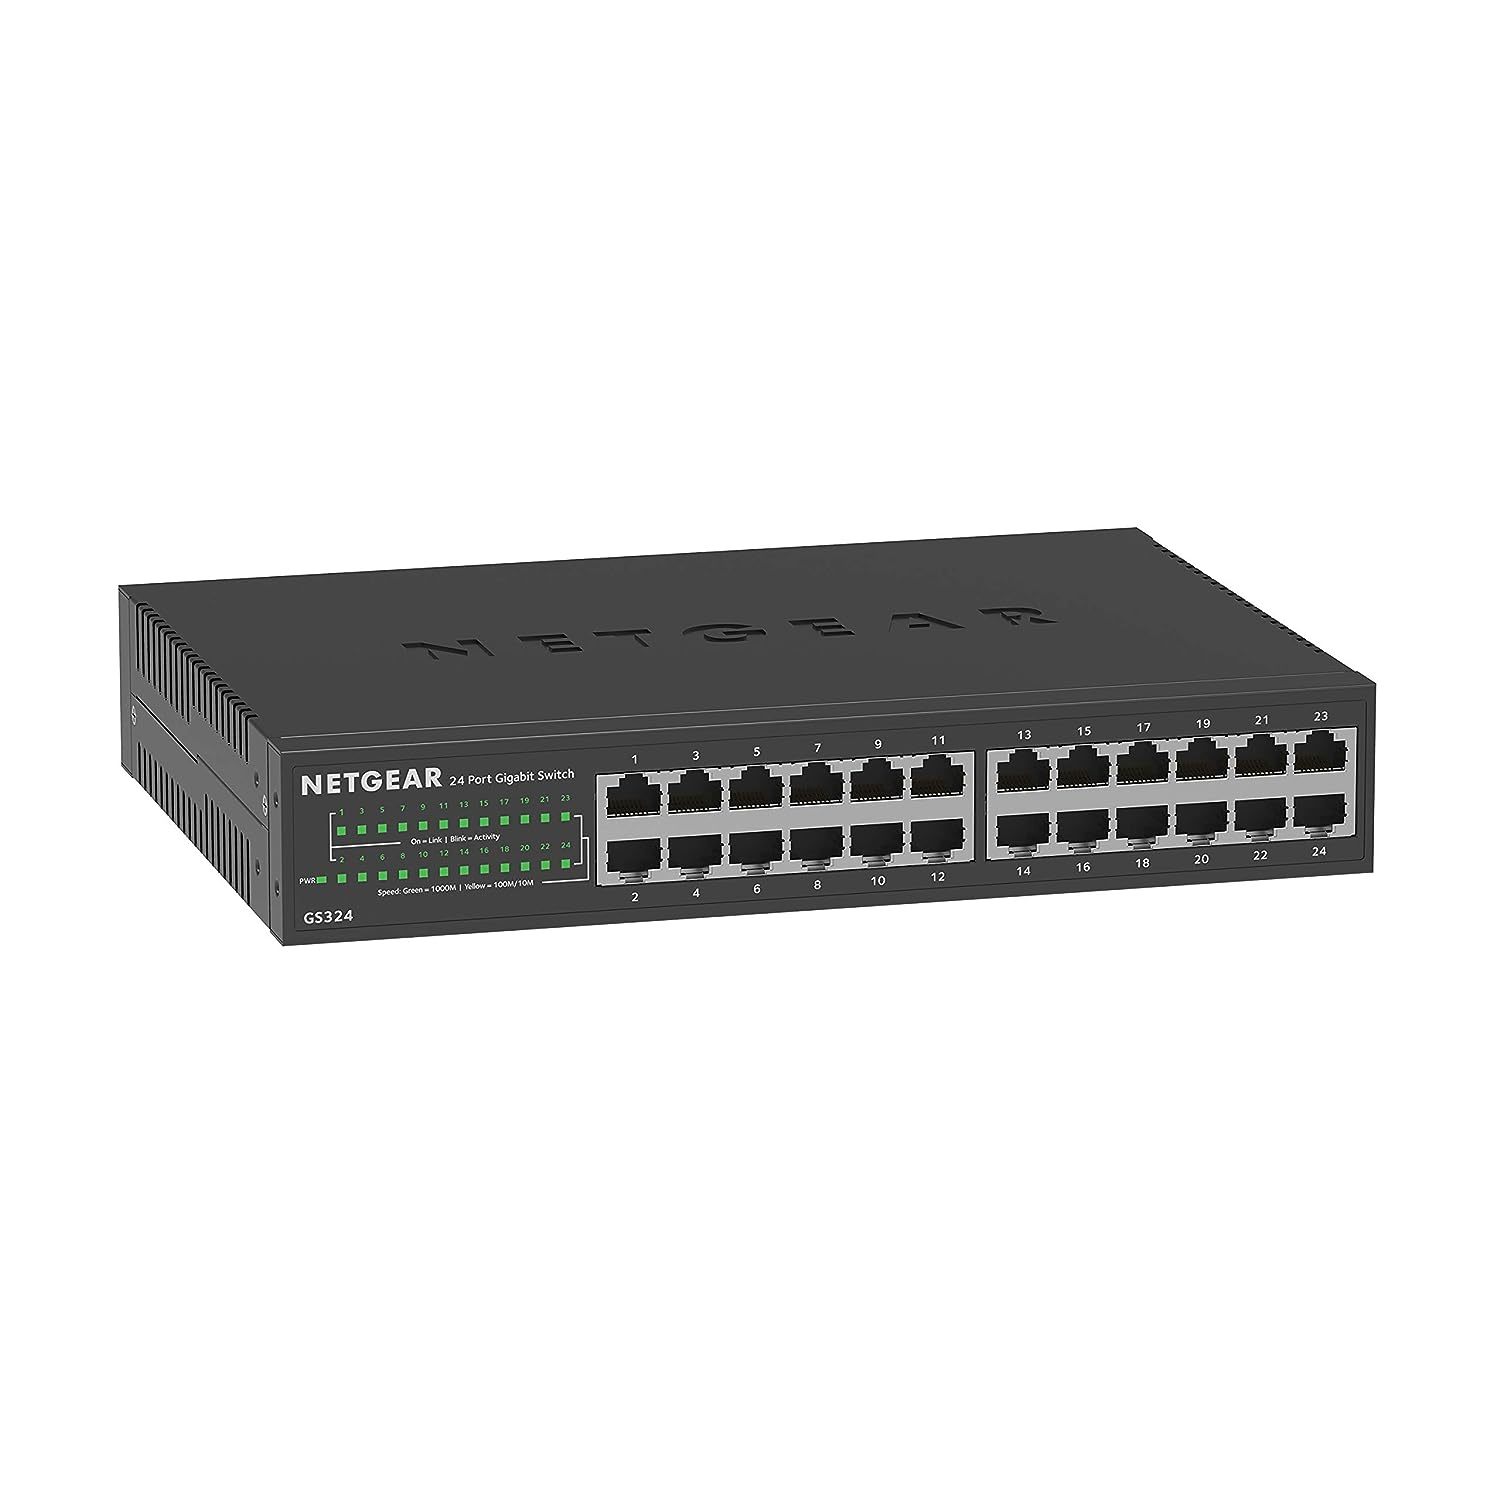 Primary image for 24-Port Gigabit Ethernet Unmanaged Switch (Gs324) - Desktop, Wall, Or Rackmount,